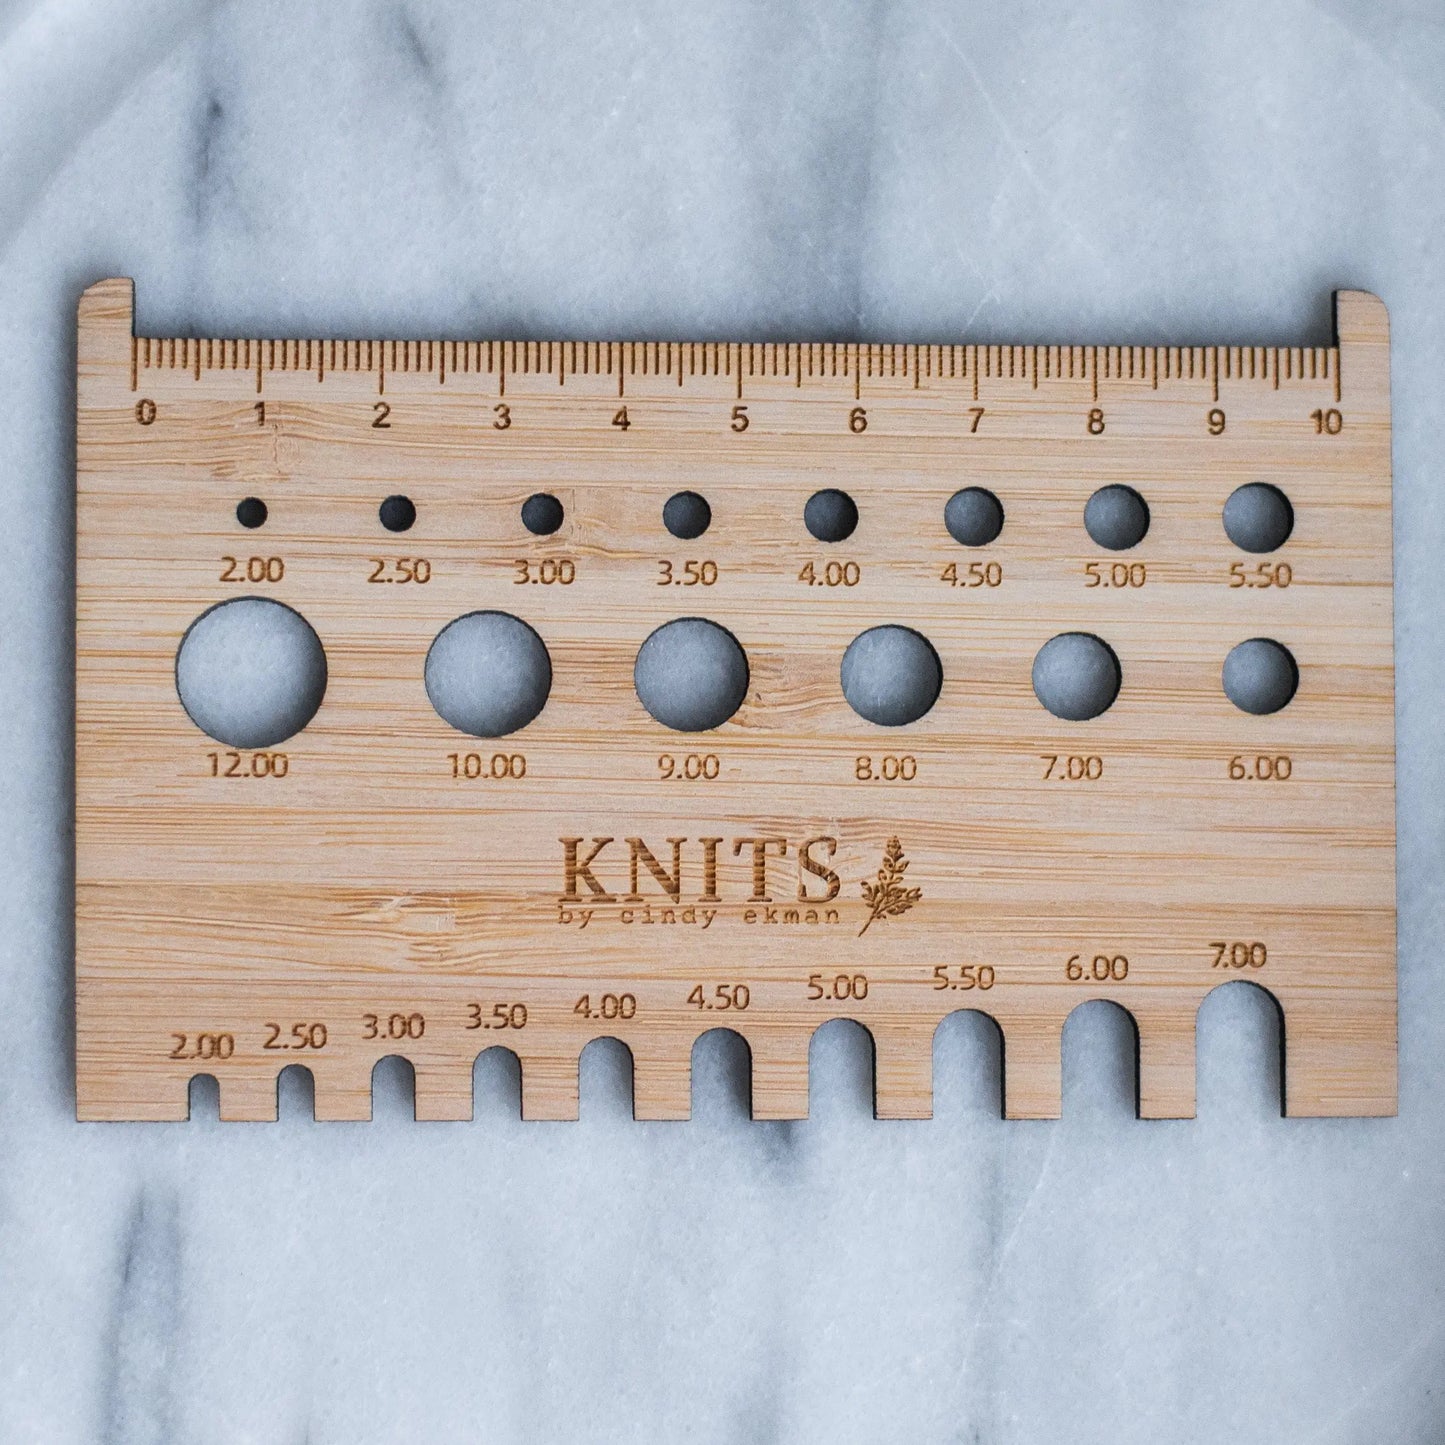 The KNITS measure tool